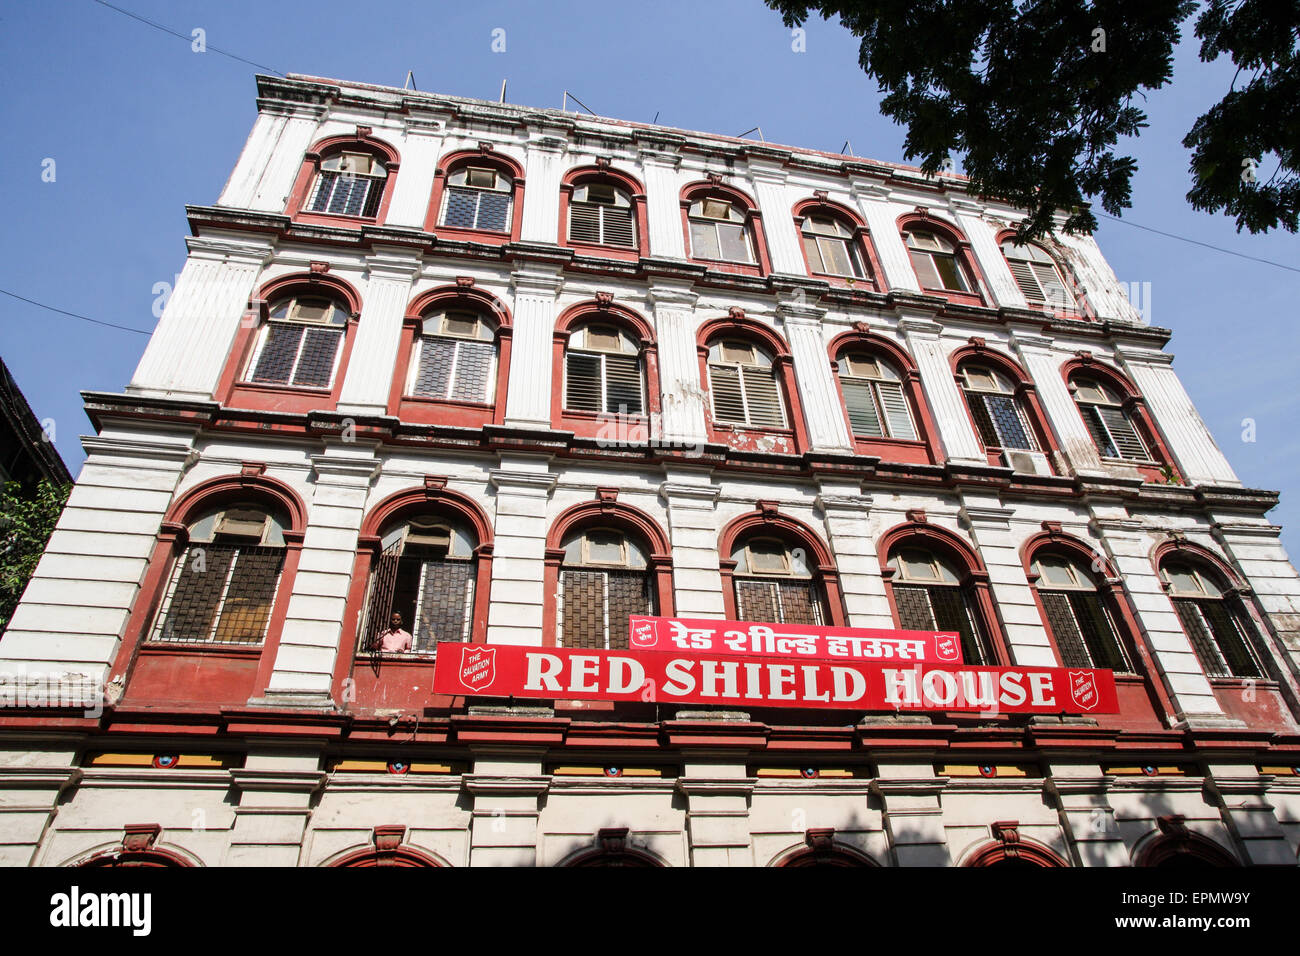 Red Shield House, budget accommodation run by Salvation Army and popular with backpackers. Close to The Taj Hotel, four months after terrorist attack on this city in Coloba area of Mumbai/ Bombay, India's economic powerhouse and capital of Maharashtra State, India, Asia. Stock Photo